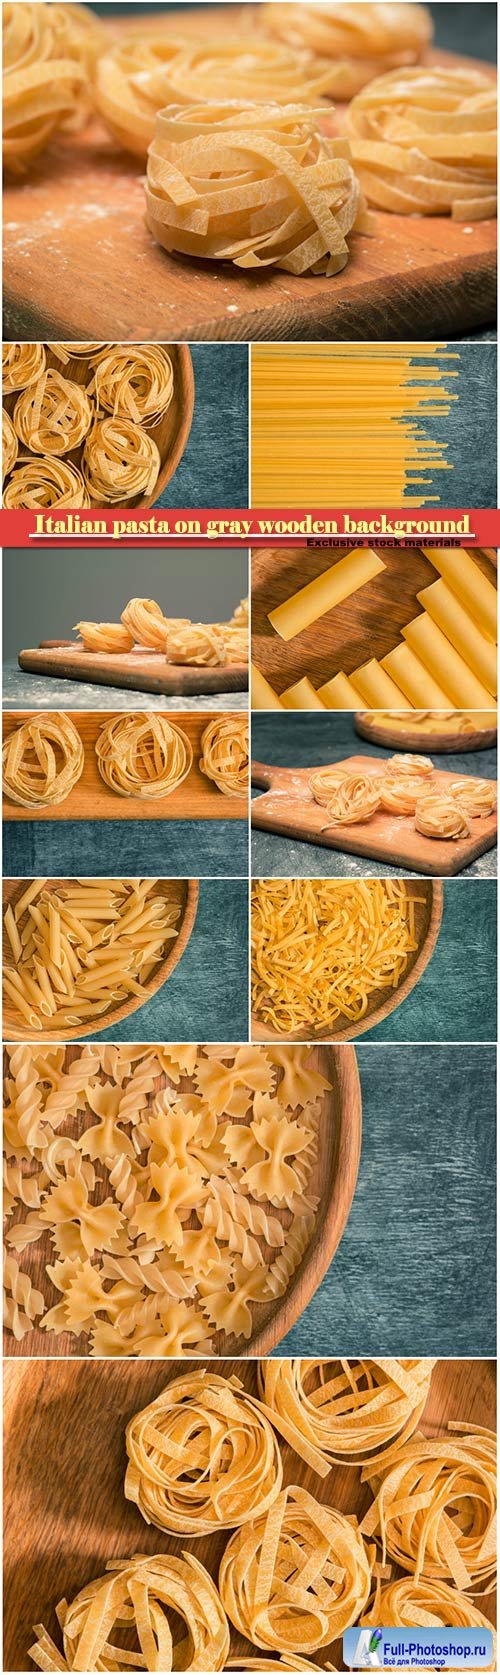 The dry Italian pasta on gray wooden background